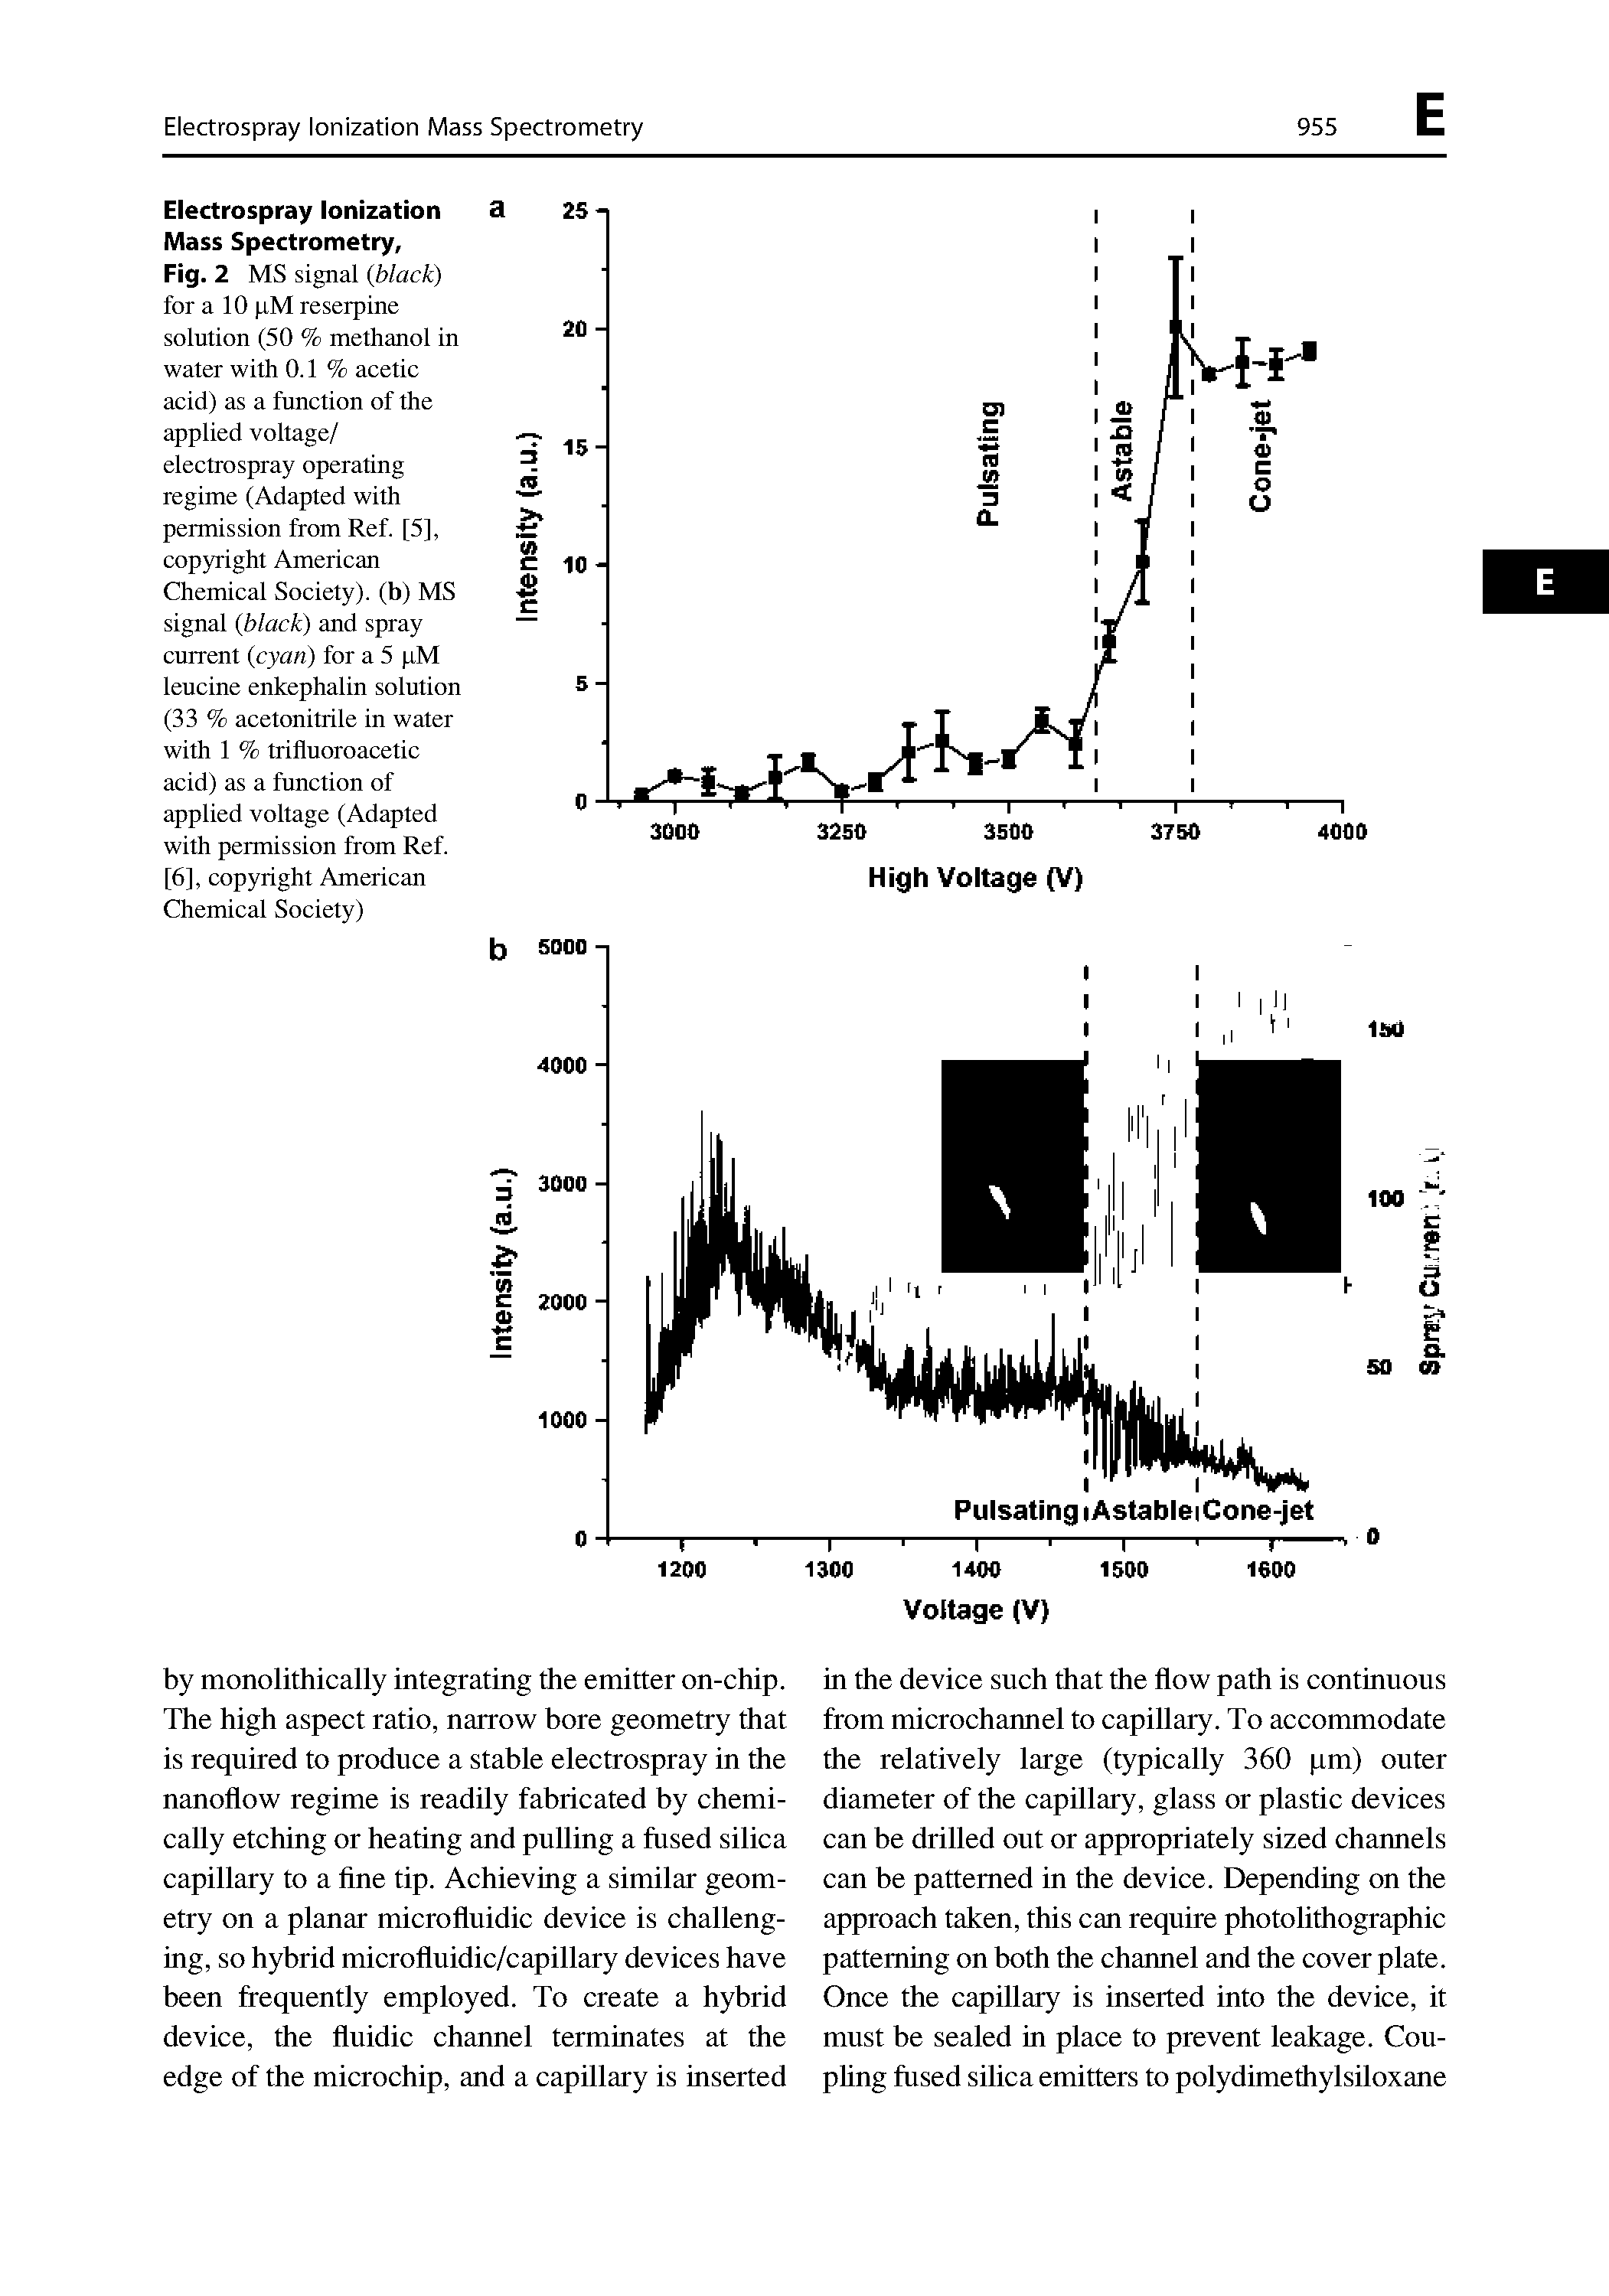 Fig. 2 MS signal (black) for a 10 )iM reserpine solution (50 % methanol in water with 0.1% acetic acid) as a function of the applied voltage/ electrospray operating regime (Adapted with permission from Ref. [5], copyright American Chemical Society), (b) MS signal (black) and spray current (cyan) for a 5 pM leucine enkephalin solution (33 % acetonitrile in water with 1 % trifluoroacetic acid) as a function of applied voltage (Adapted with permission from Ref. [6], copyright American Chemical Society)...